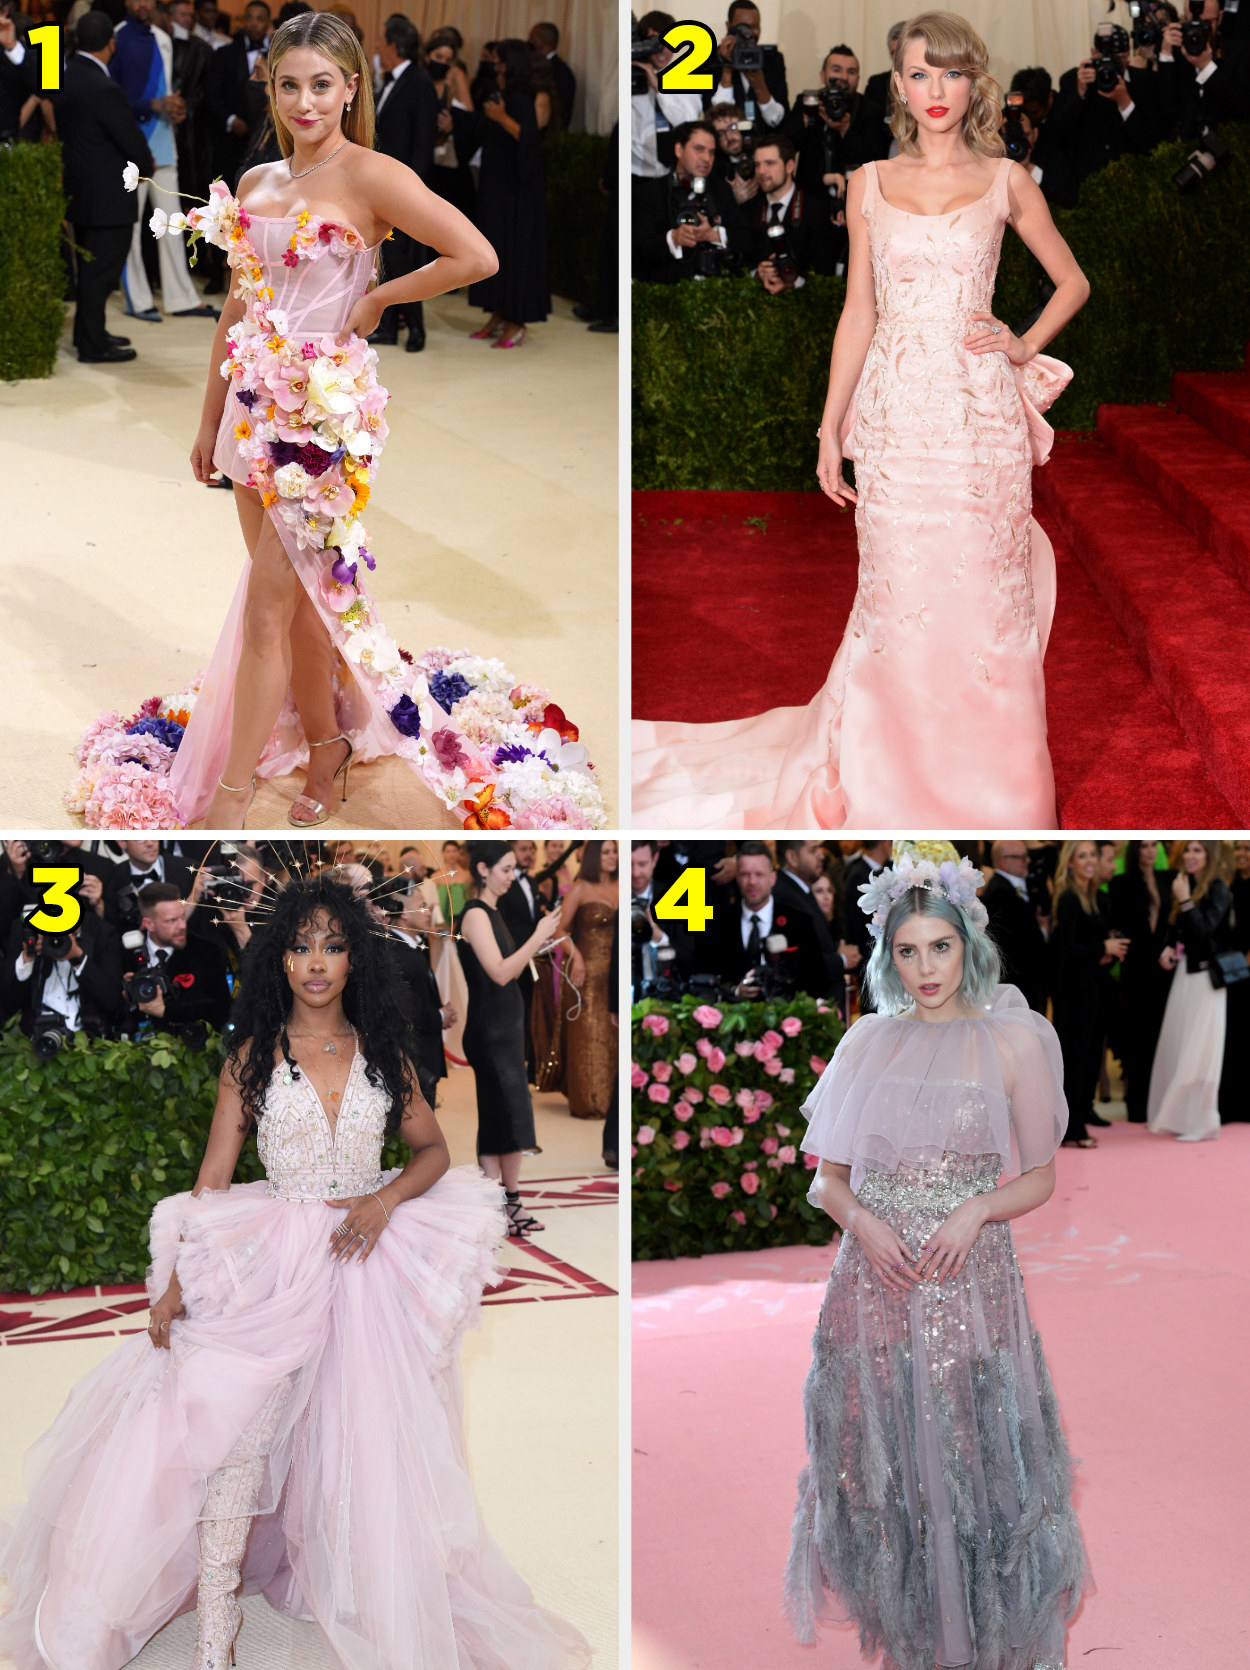 1. A pink corset gown with every US state&#x27;s flower. 2. a strapless gown with a giant bow on the back. 3. A sleeveless gown with a giant ballgown skirt and crown. 4. A mesh gown with sequins and an overlay.